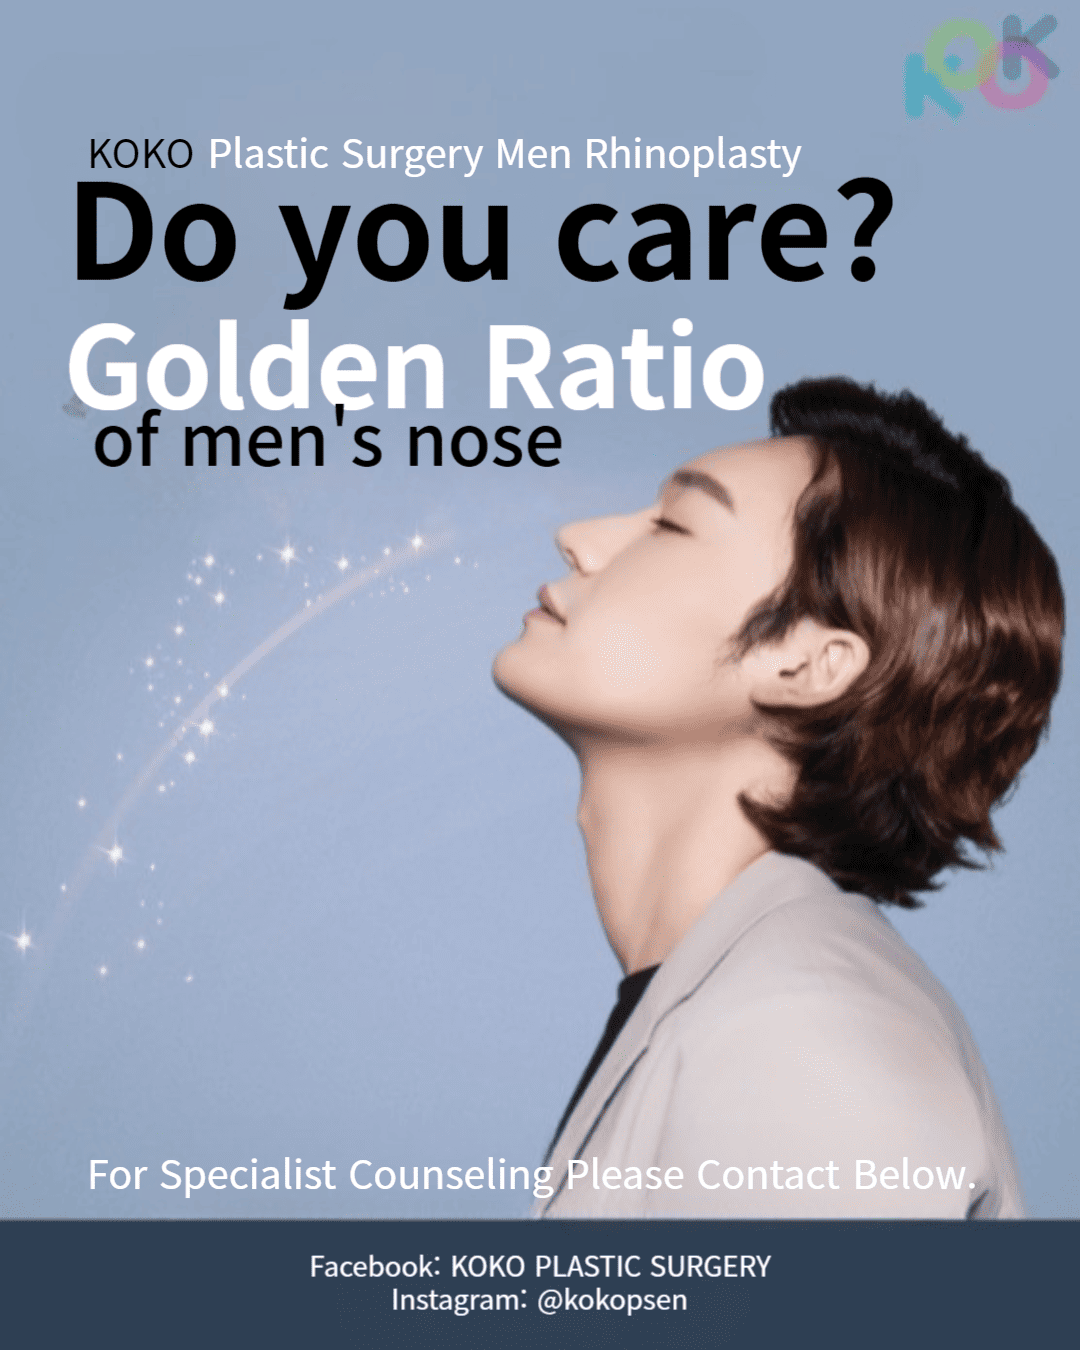 Image to market about Golden Ratio of Men's nose for male rhinoplasty